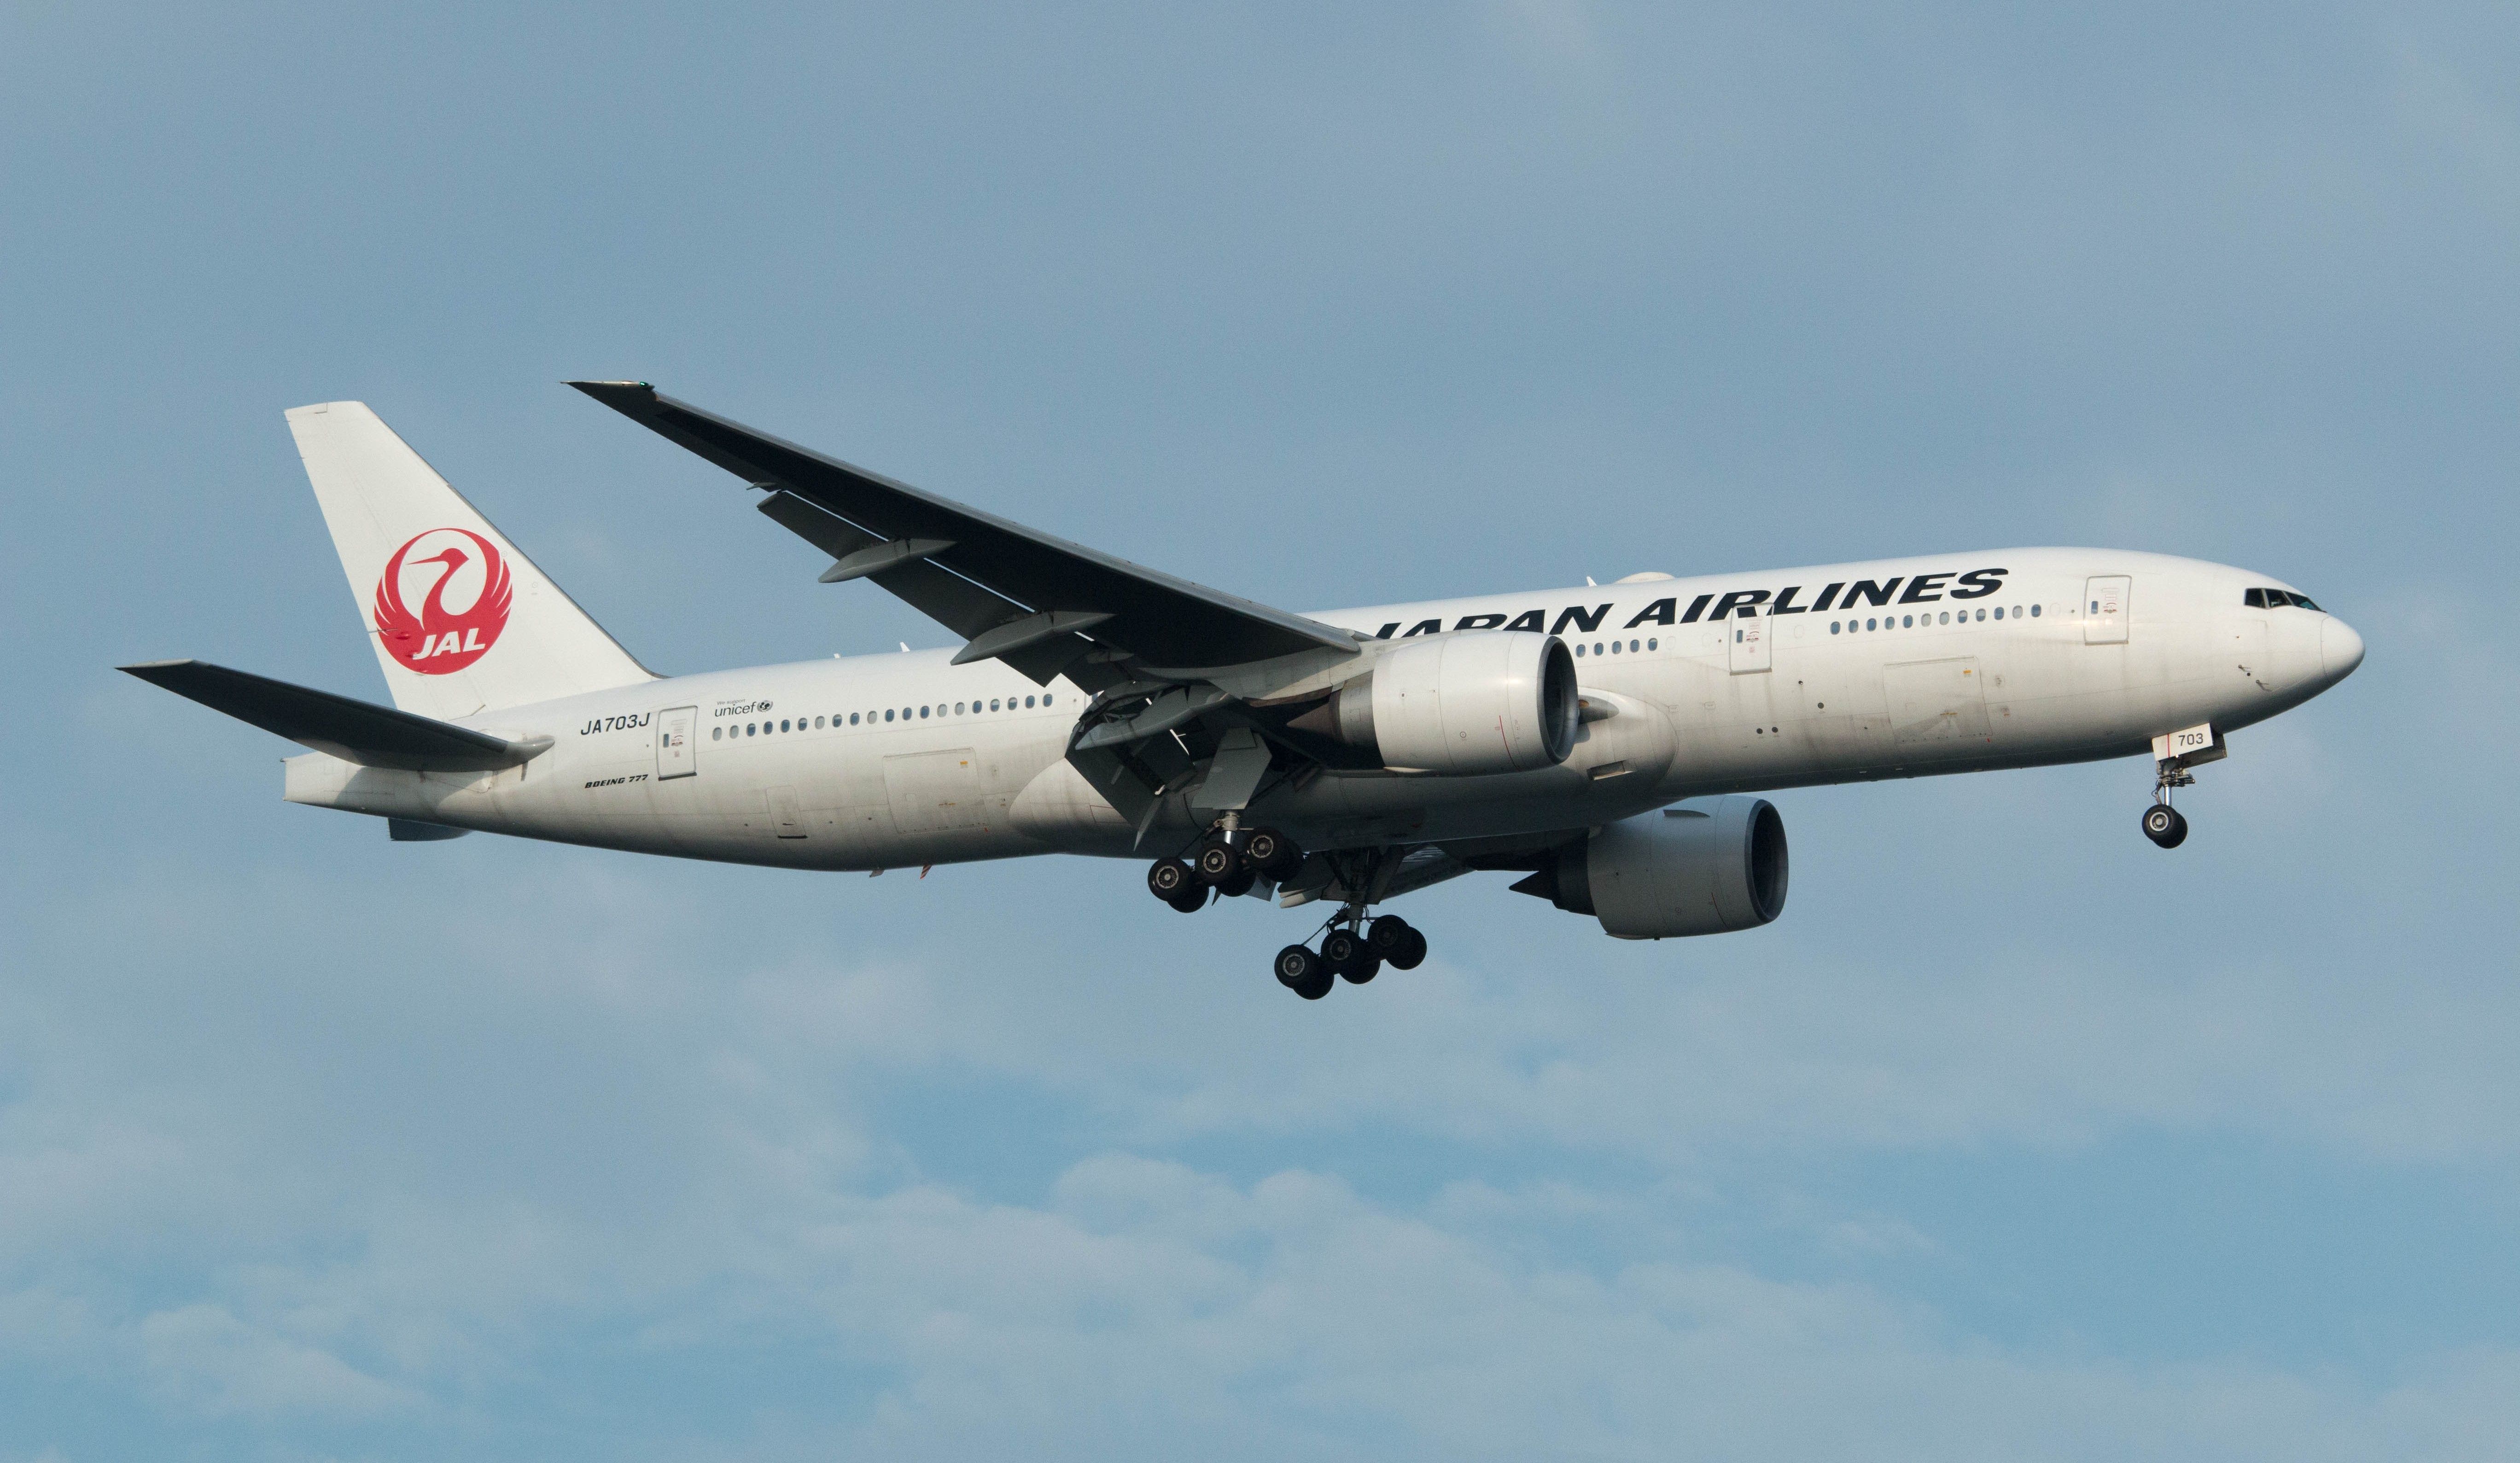 Gone: Japan Airlines Has Operated Its Last Boeing 777-200ER Flight